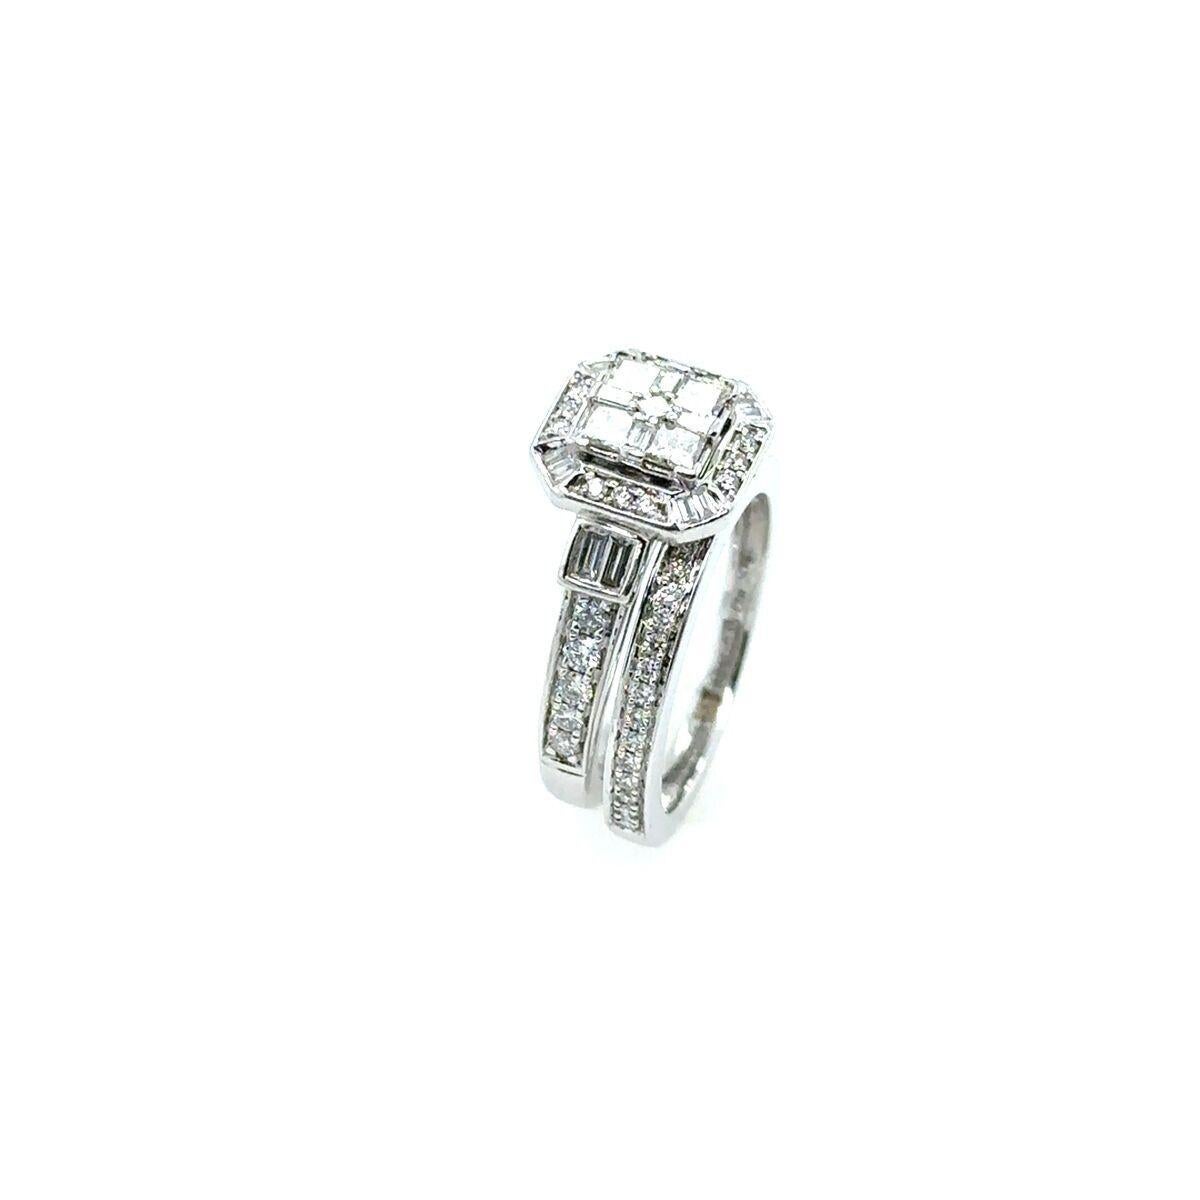 This gorgeous Vera Wang Diamond bridal set, engagement ring set with a mix of 0.80ct princess cut, baguette and round Diamonds with matching Diamond wedding band set with 0.15ct small round Diamonds all in an 18ct white gold setting. Can make a